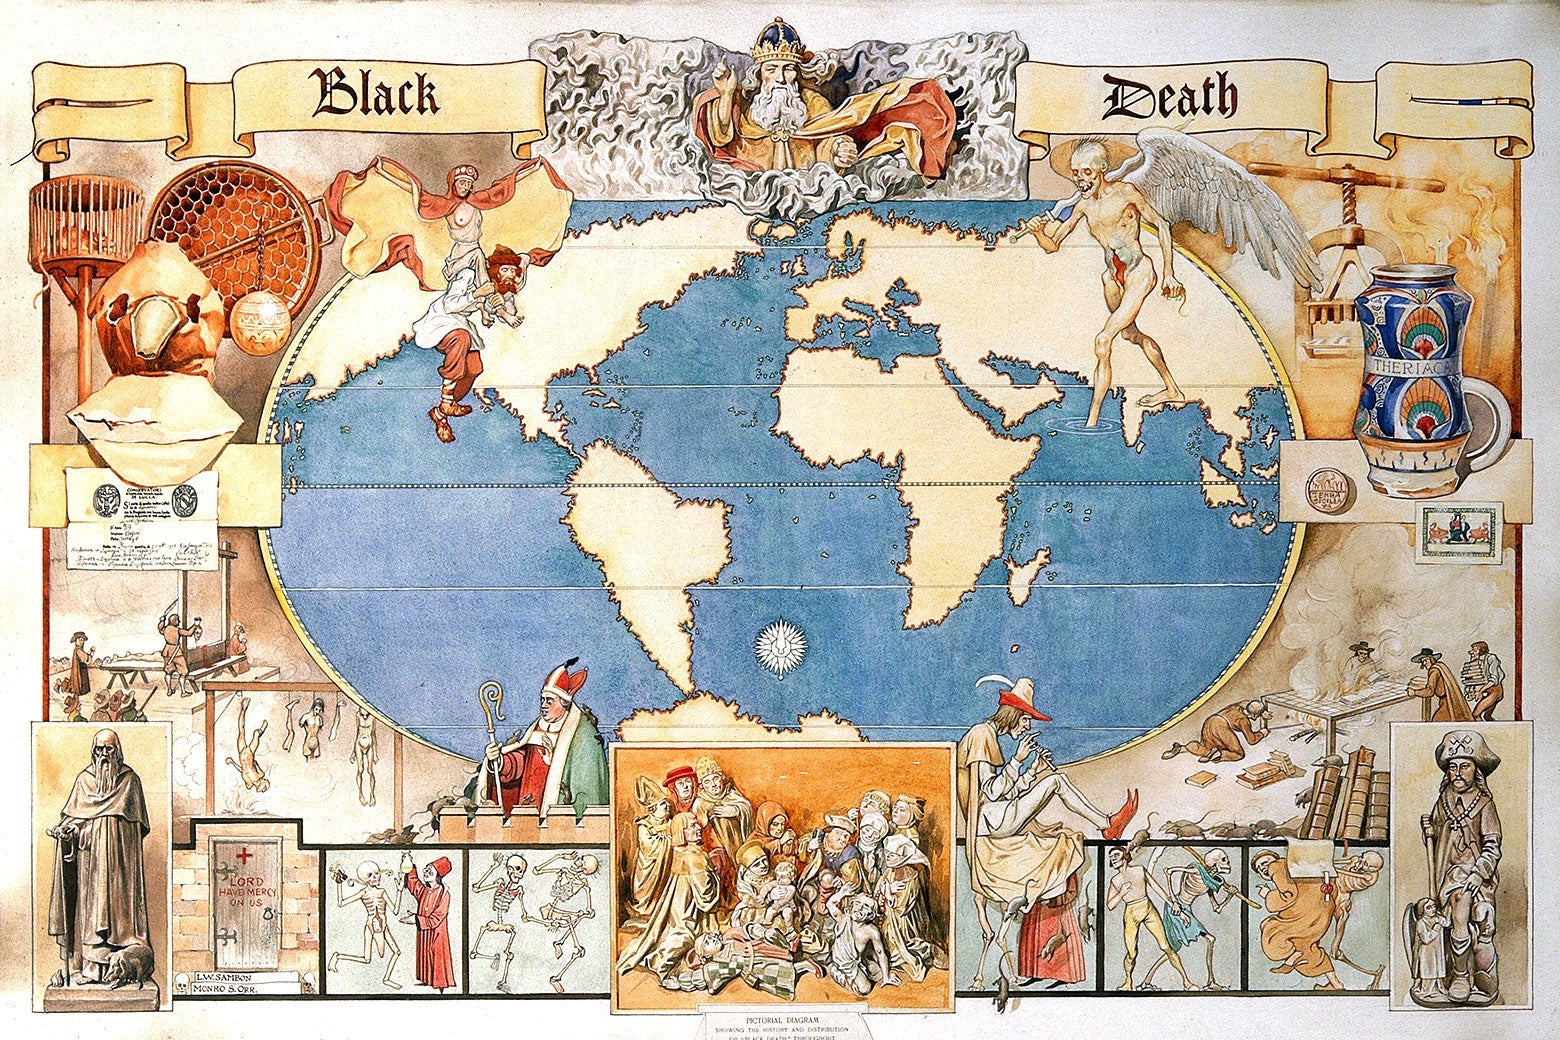 "The Black Death, map of the world, with vignettes." Undated watercolor by Monro S. Orr, who lived from 1874-1955.